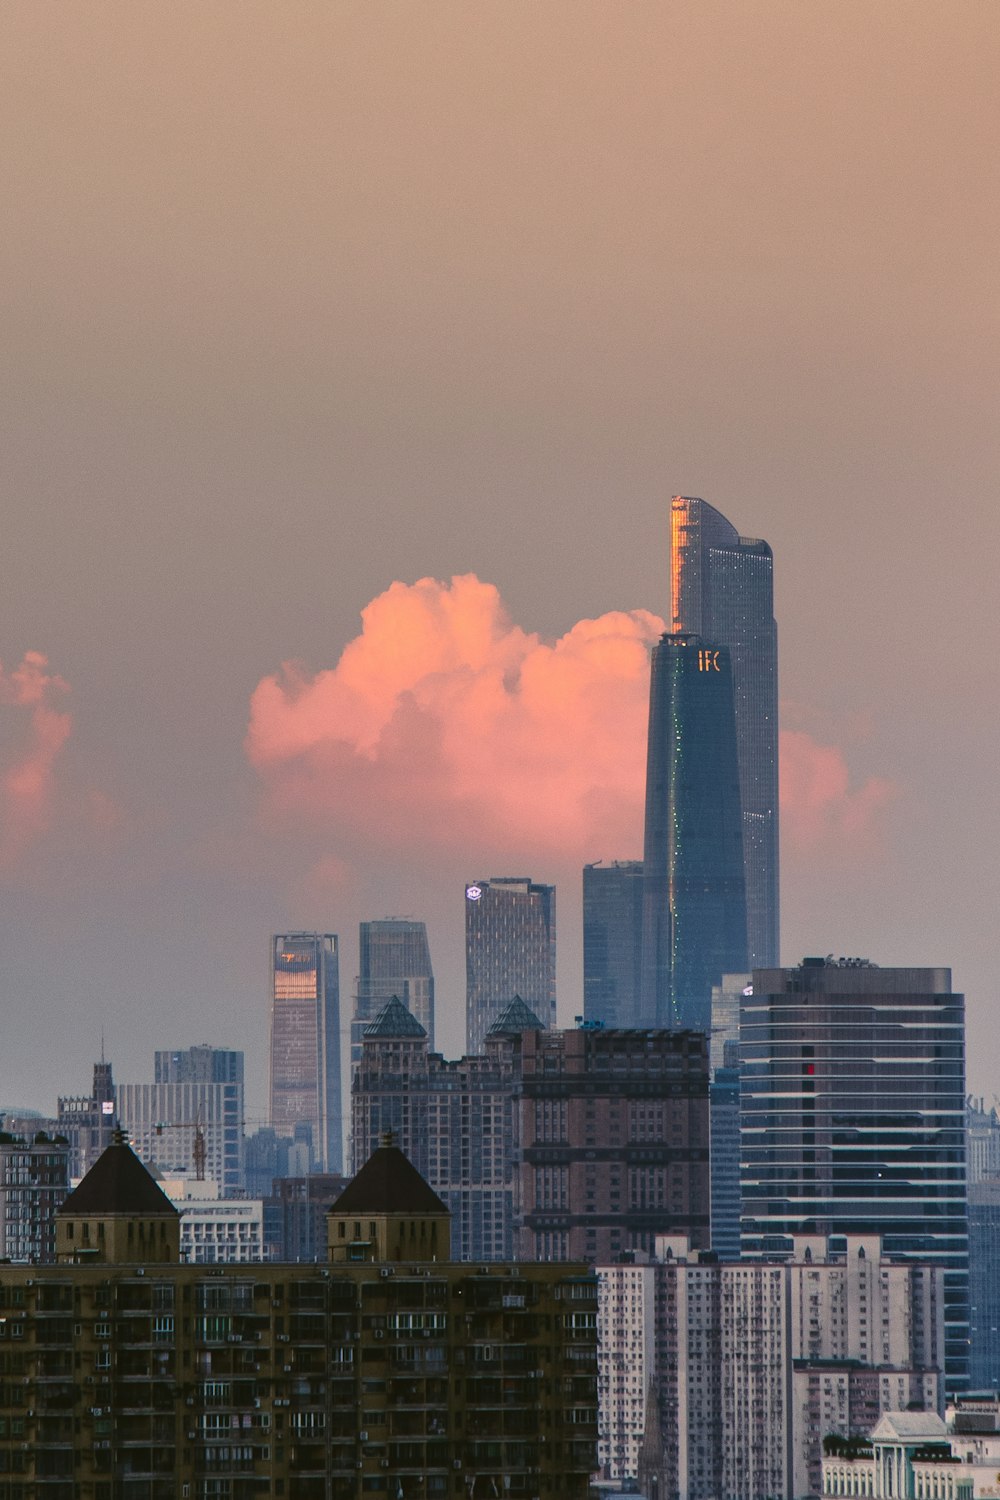 a view of a city skyline with a pink cloud in the sky